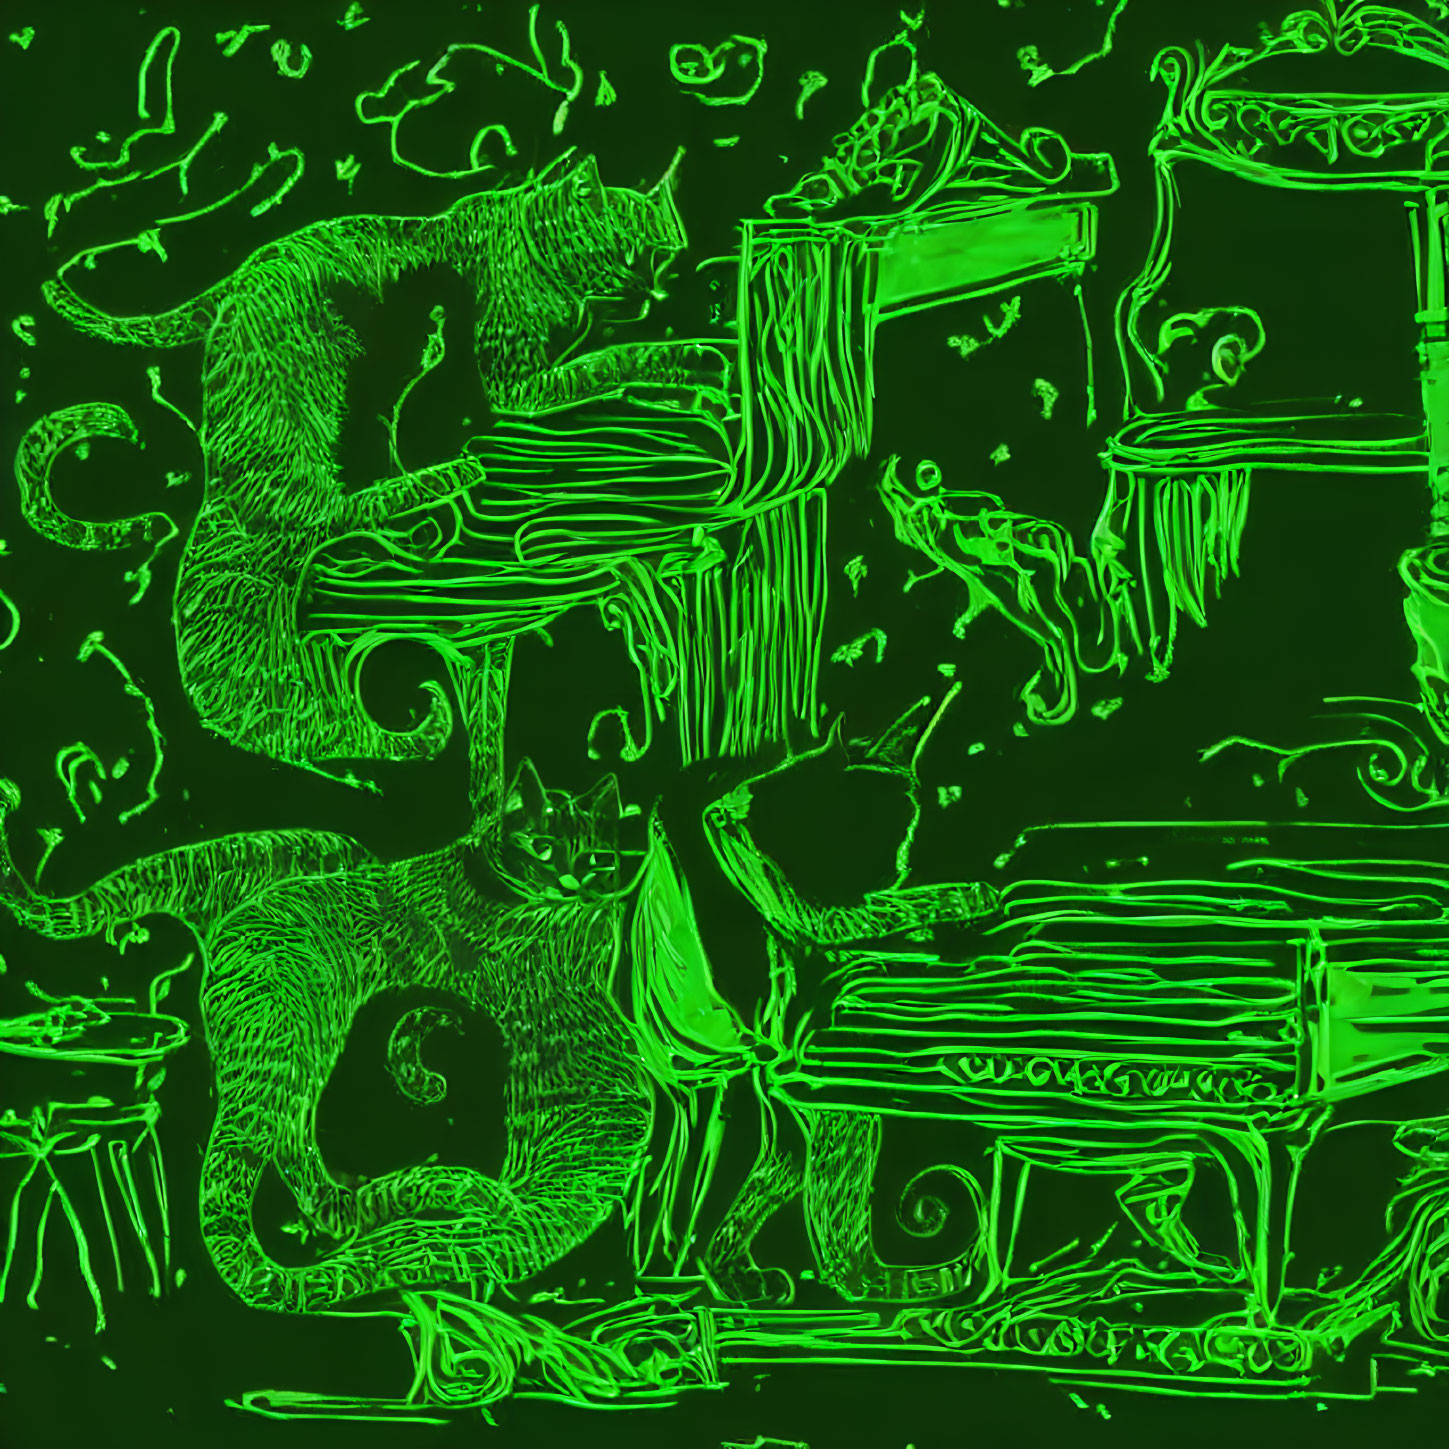 Whimsical neon green and black cat illustration with abstract dreamy furniture landscape